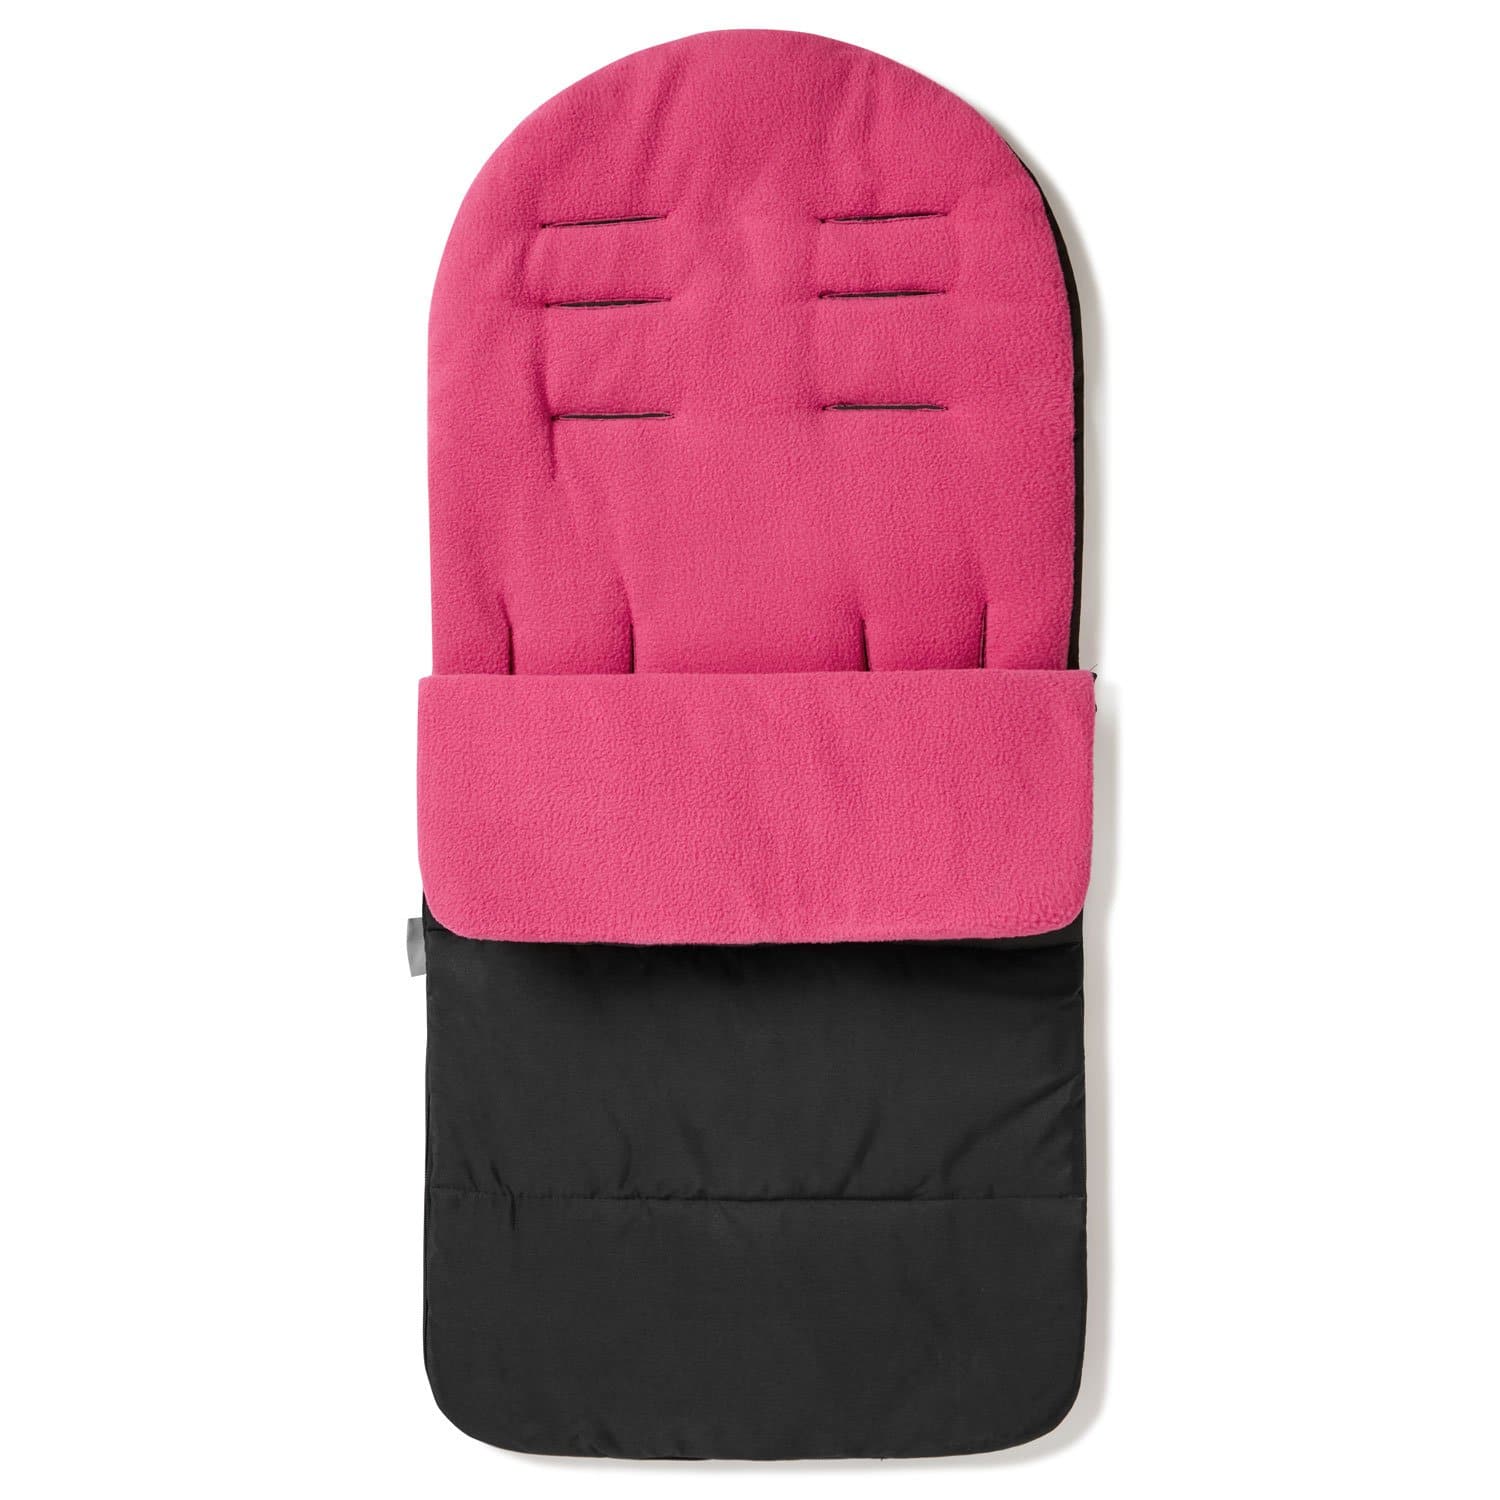 Premium Footmuff / Cosy Toes Compatible with Brio - For Your Little One